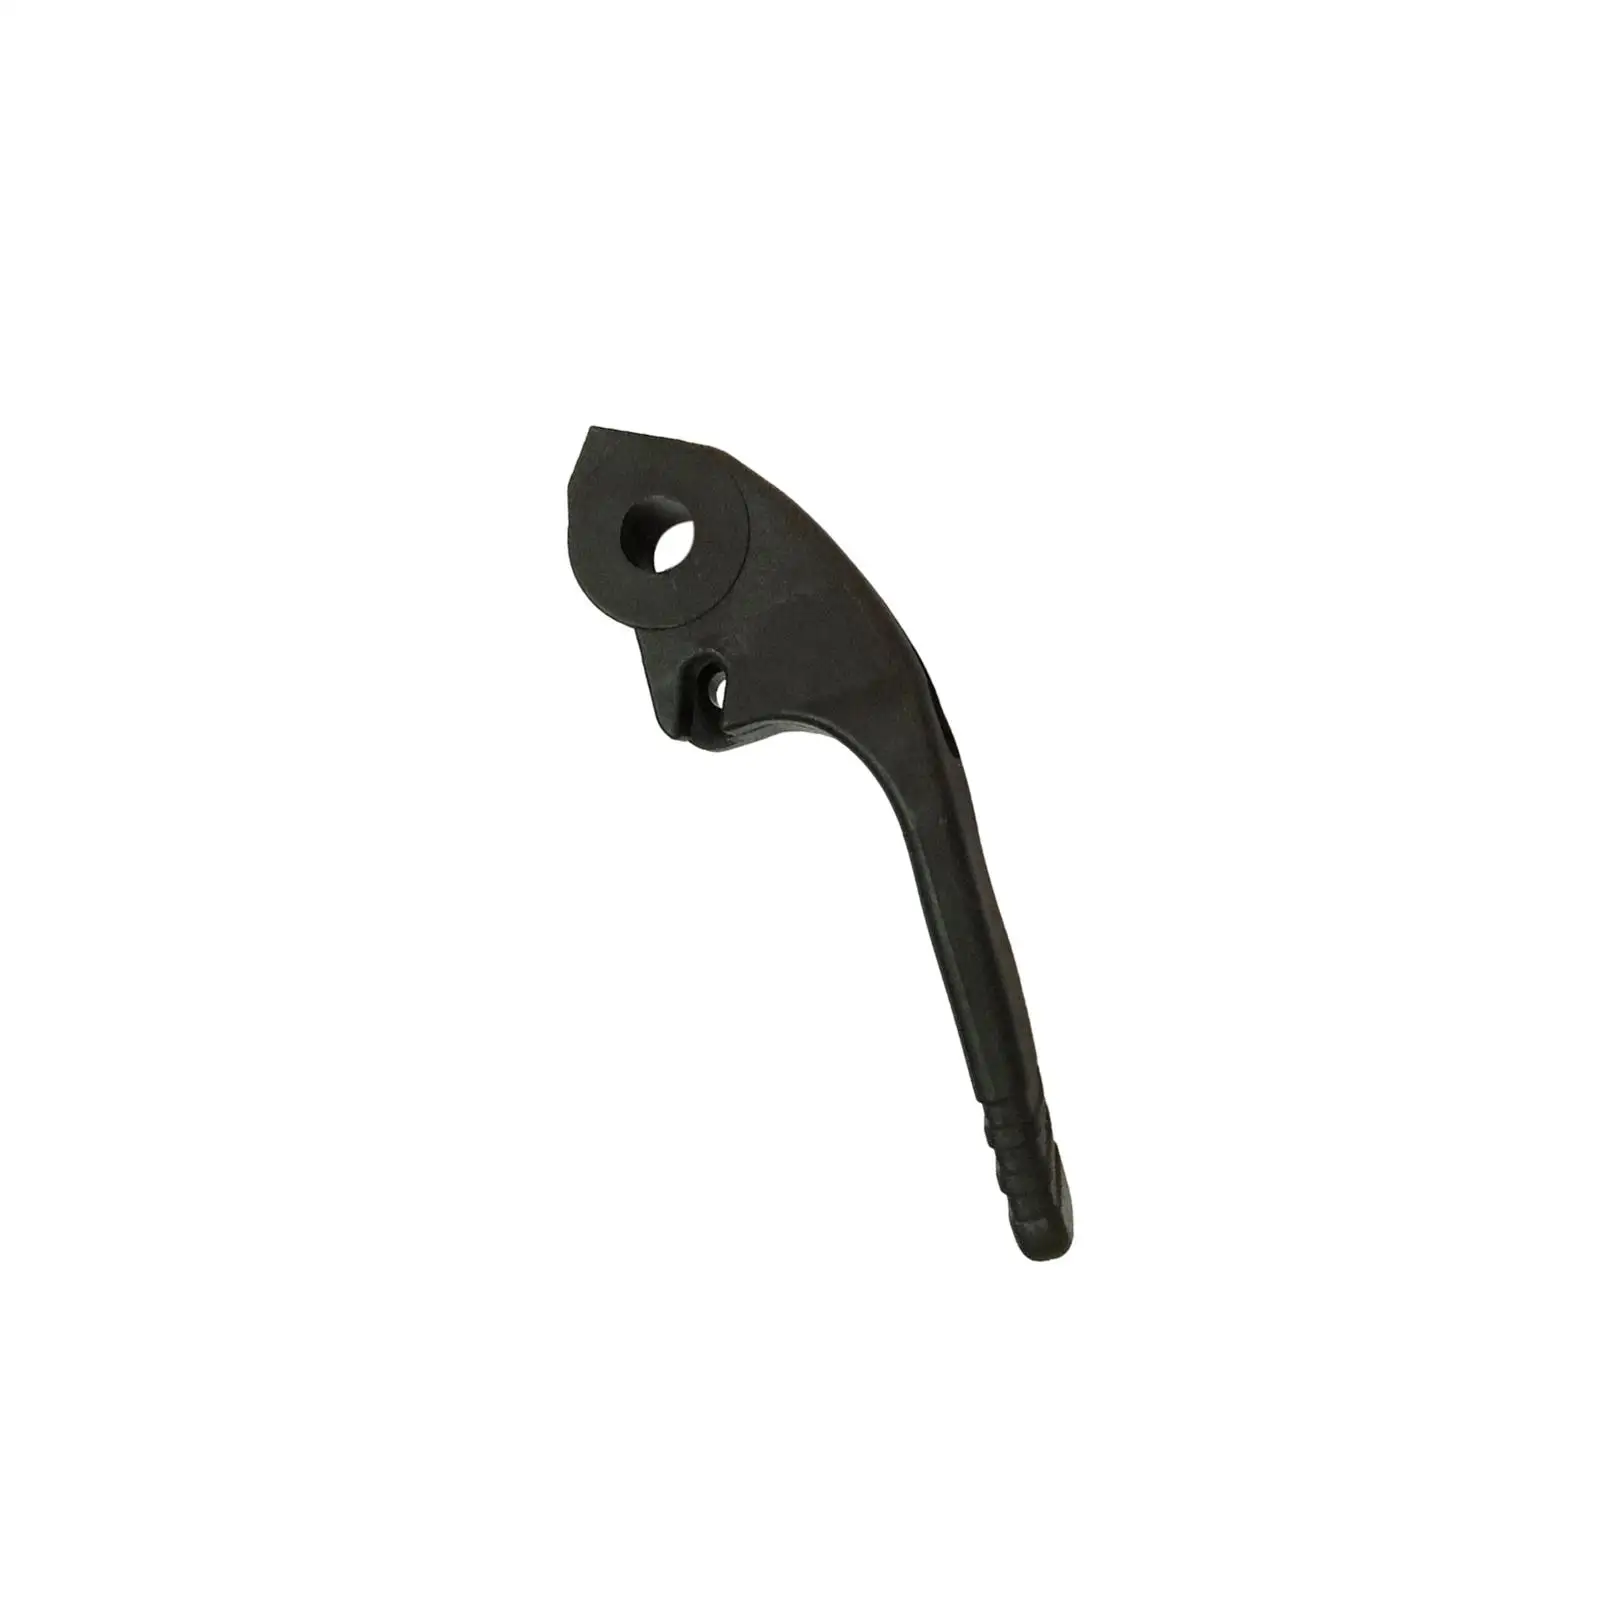 Shifter Shift Lever 63V4411100 for Outboard Engine 9.9HP 15HP Stable Performance Vehicle Repair Parts Replacement Durable